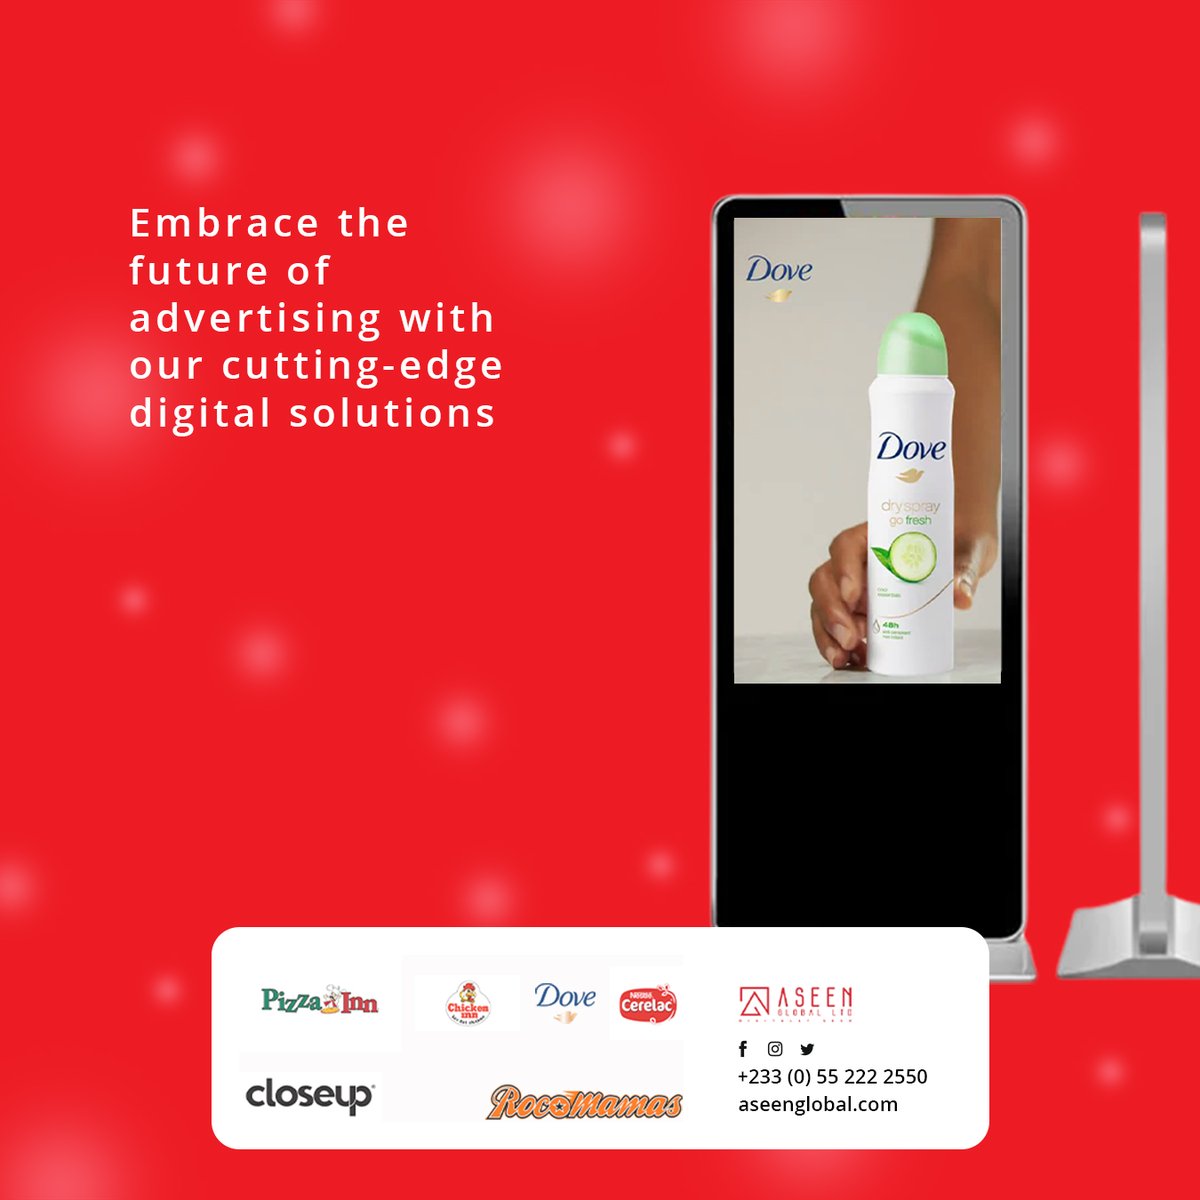 From portable digital screens to digital billboards, we provide brands with interactive ways to connect with customers
#digitalbillboard #digitalbillboardgh #ARC #achimotamall